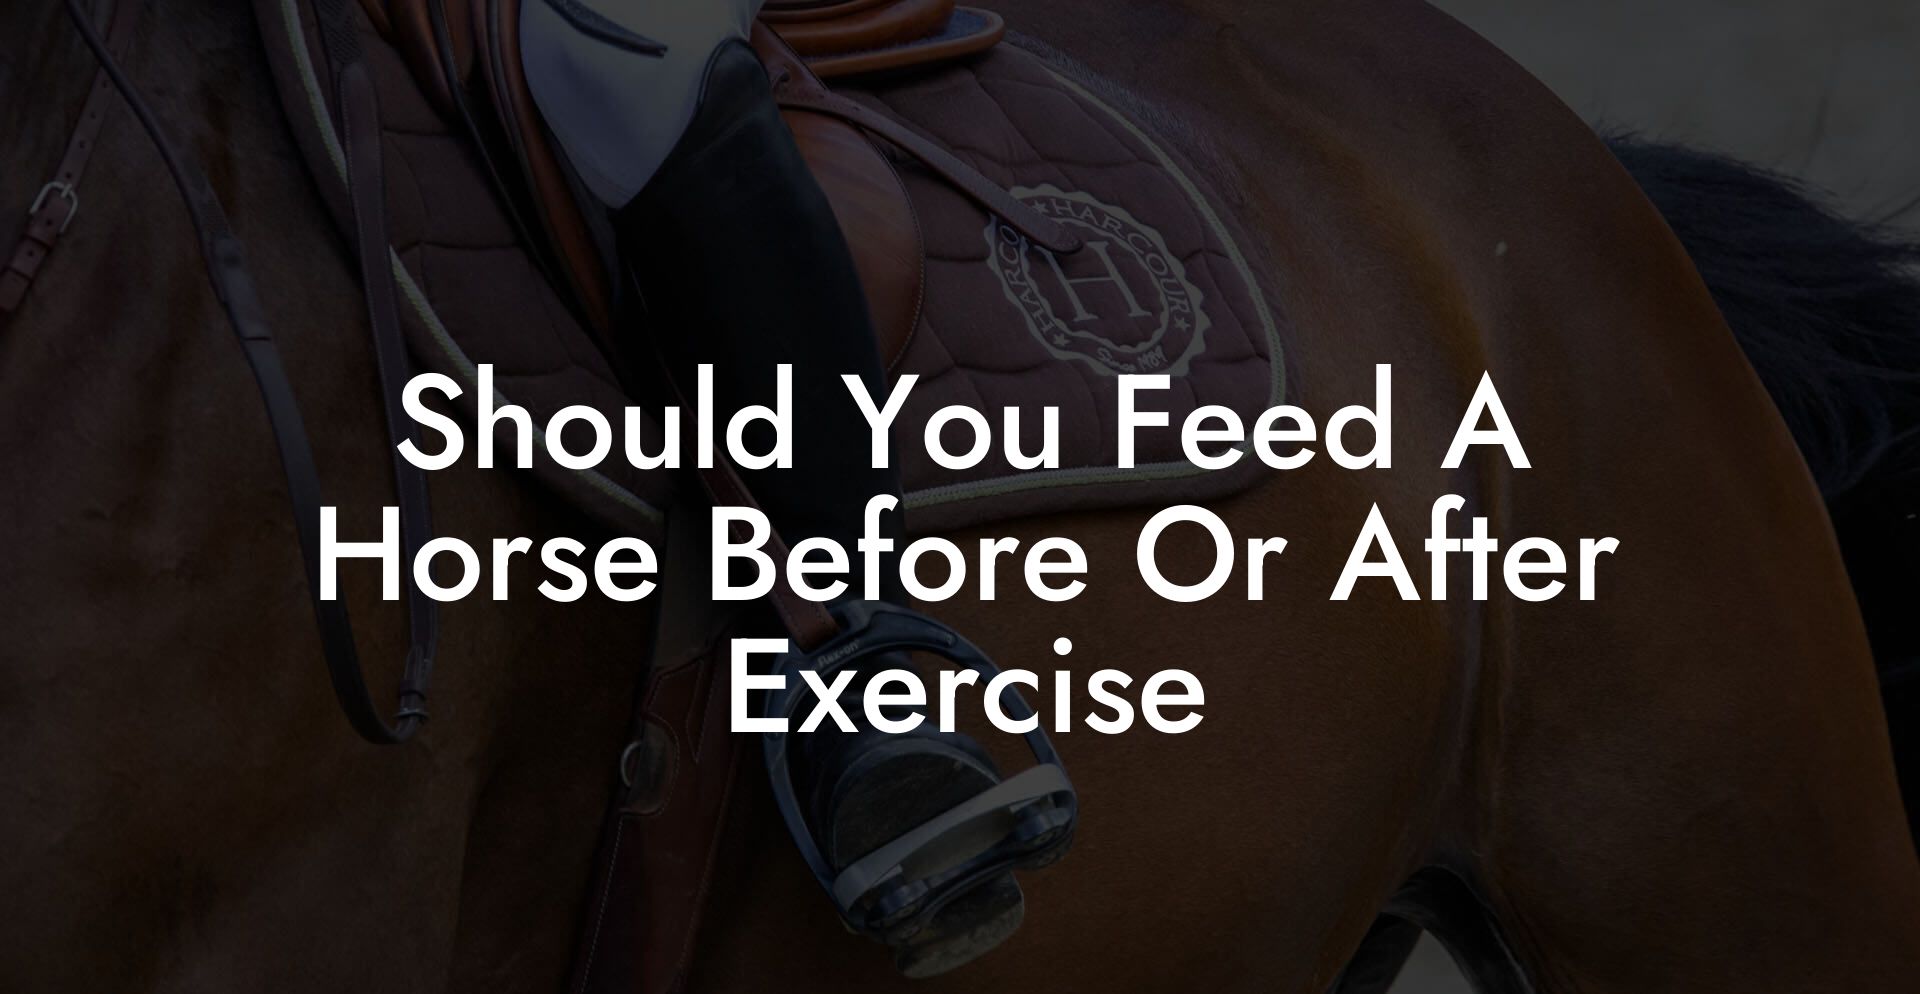 Should You Feed A Horse Before Or After Exercise